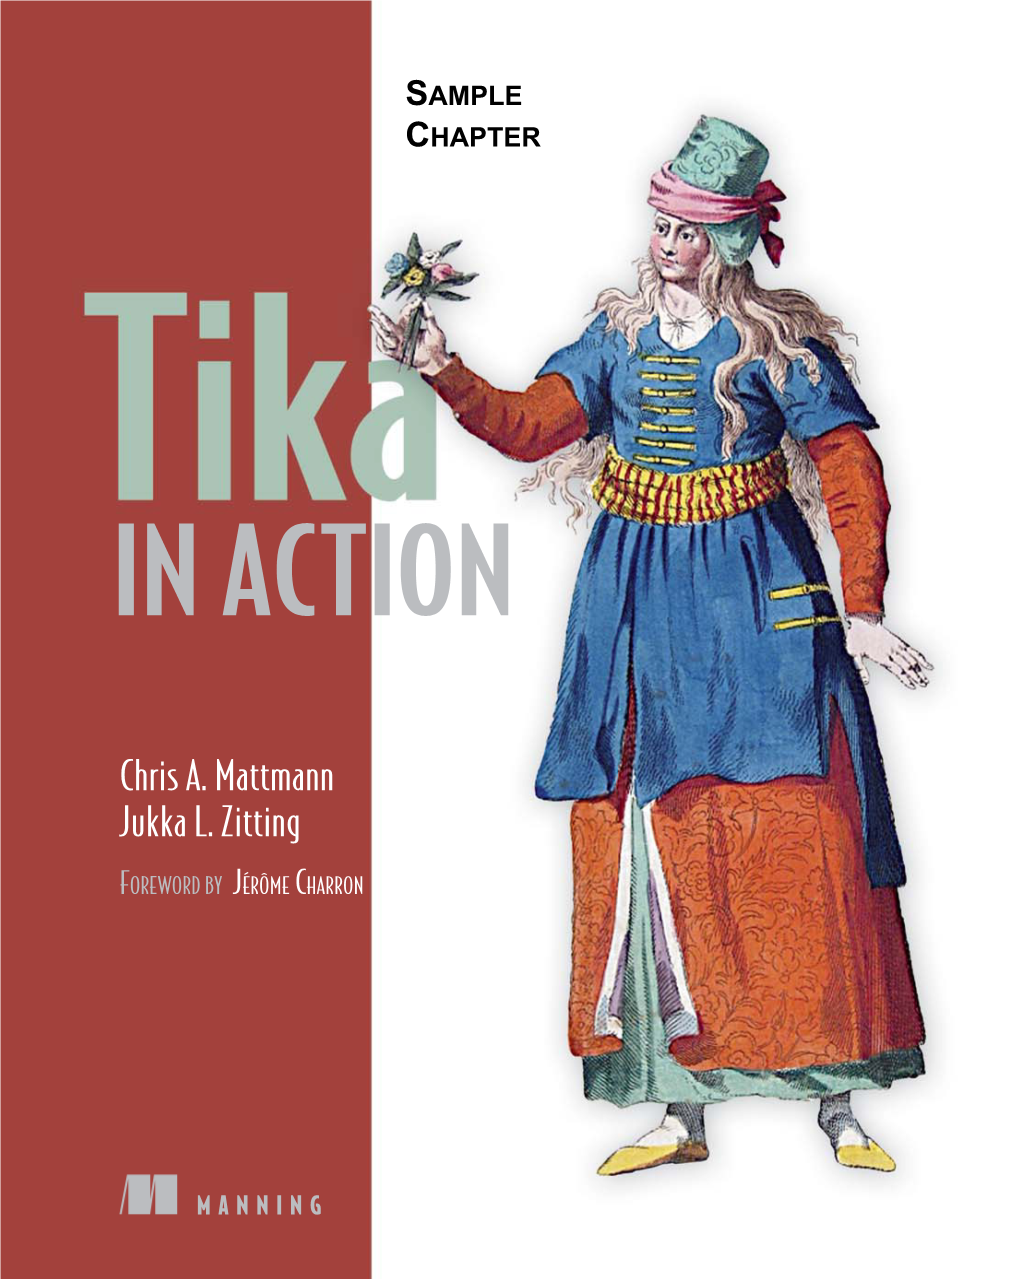 Tika in Action by Chris A